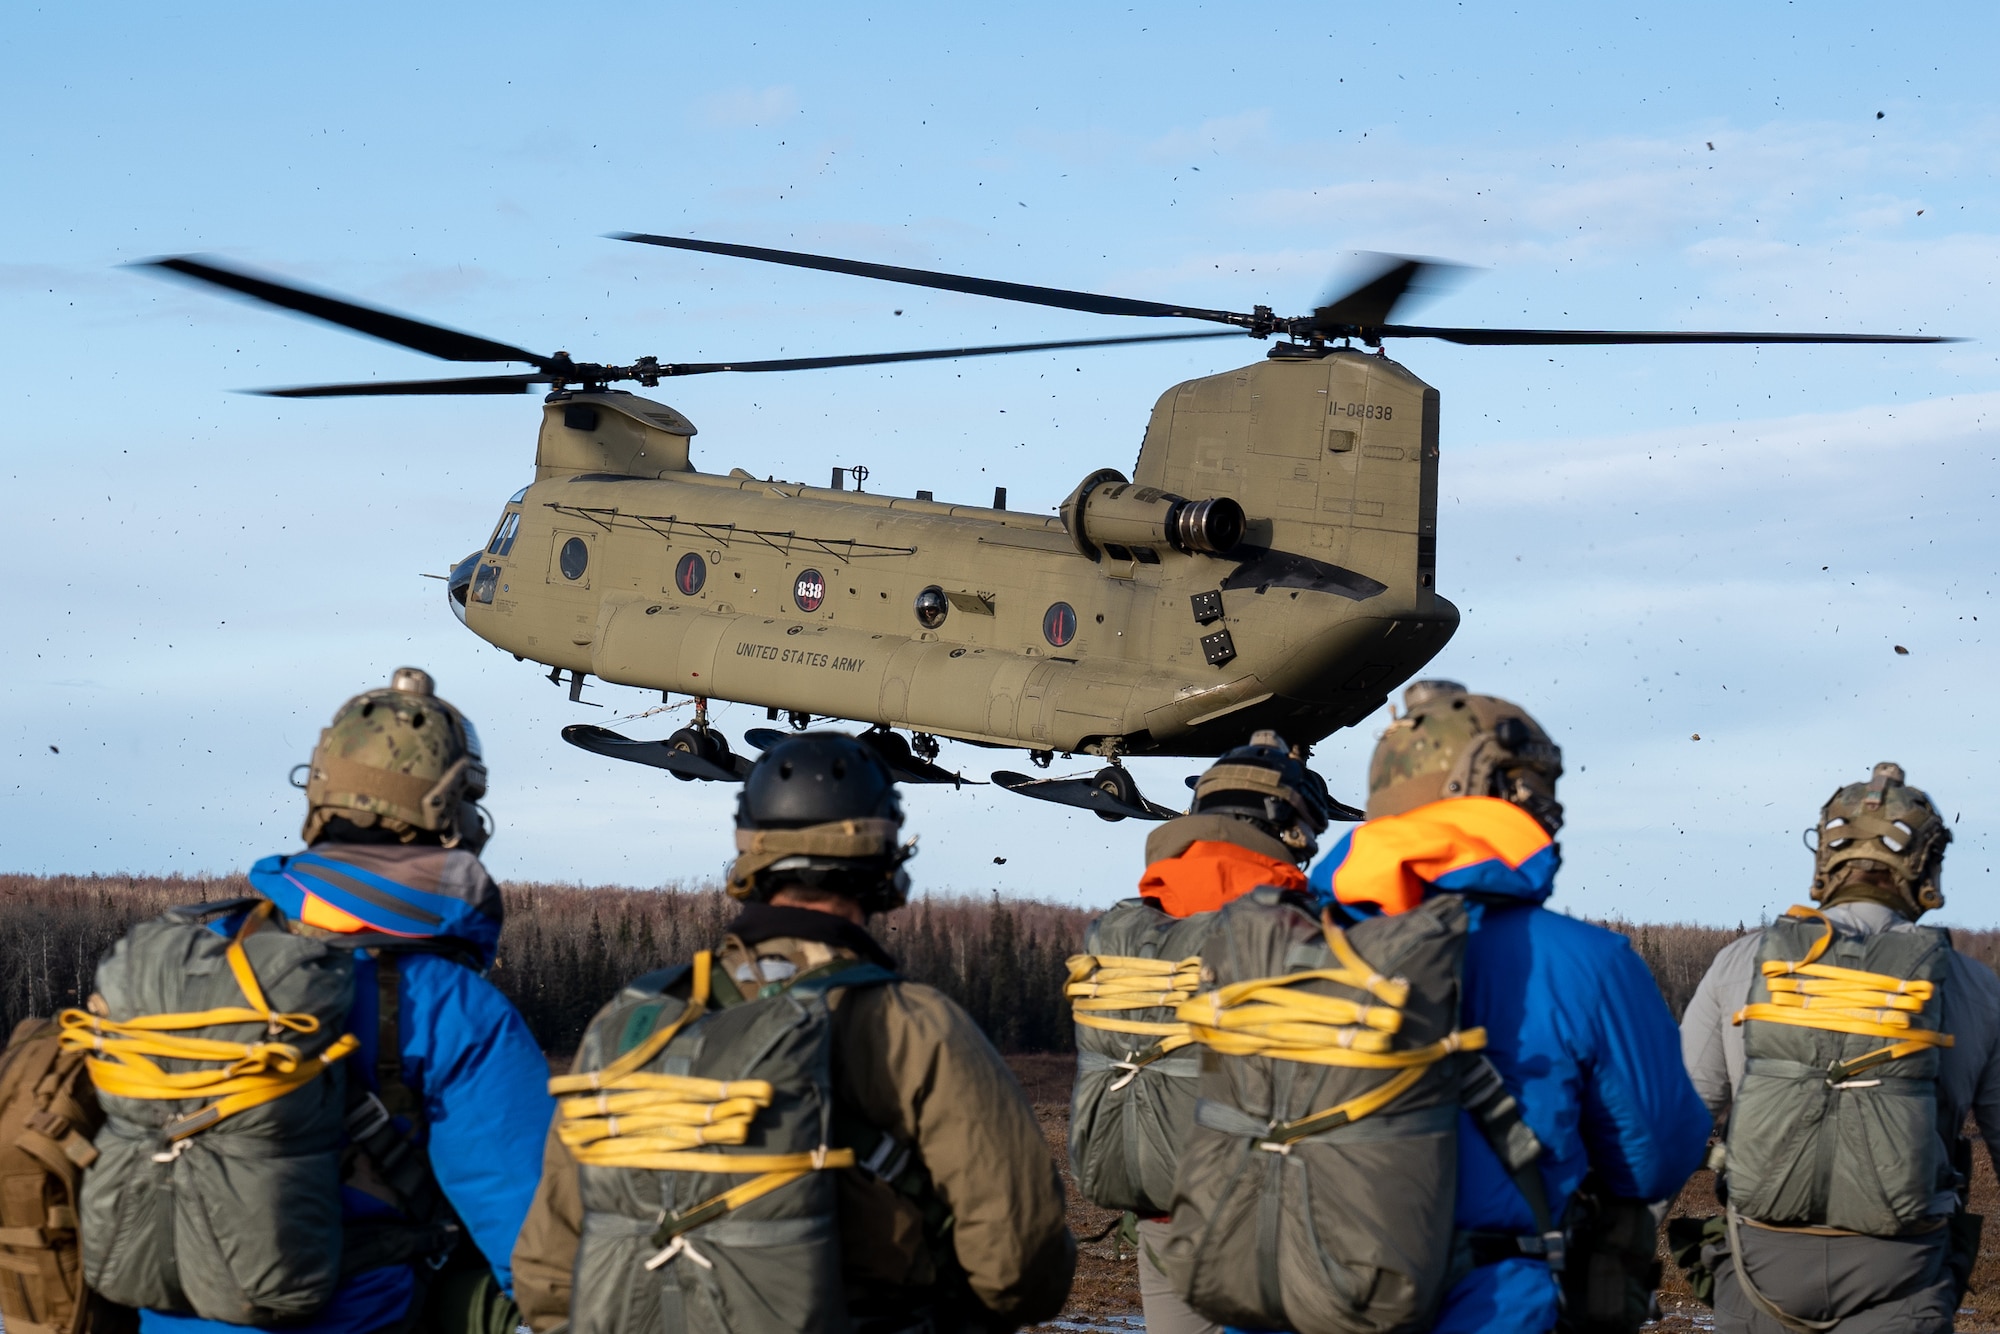 A U.S. Army National Guard CH-47F Chinook operated by Detachment 1, Bravo Company, 2-211th General Service Aviation Battalion, picks up U.S. Air Force pararescuemen assigned to the 212th Rescue Squadron, Alaska Air National Guard, during a training event at Joint Base Elmendorf-Richardson, Alaska.